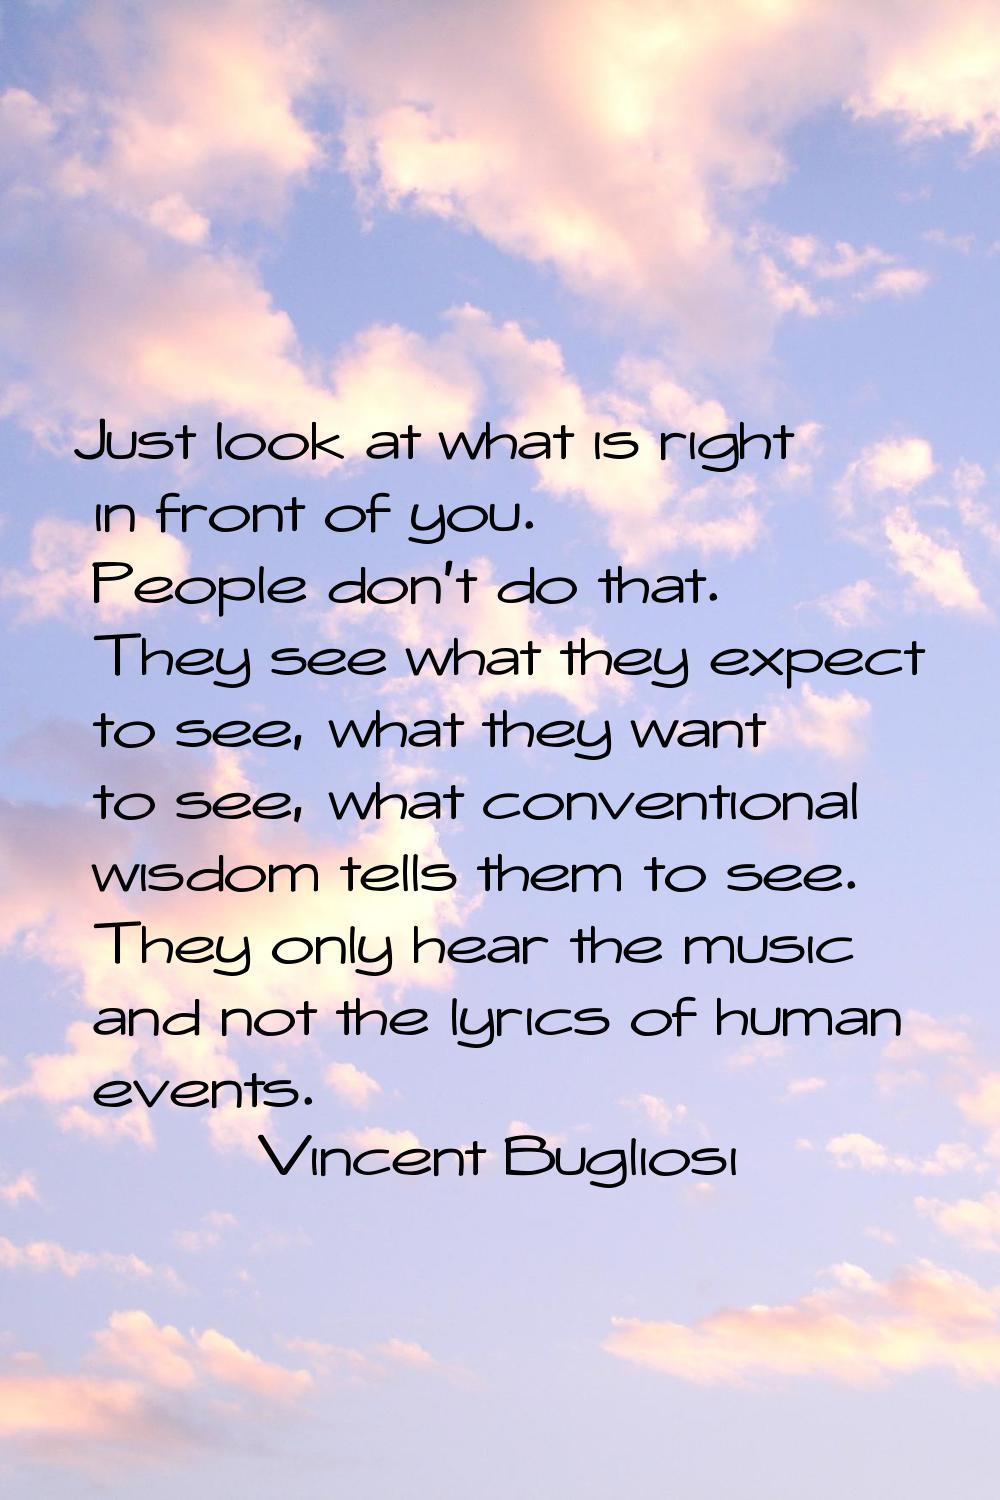 Just look at what is right in front of you. People don't do that. They see what they expect to see,